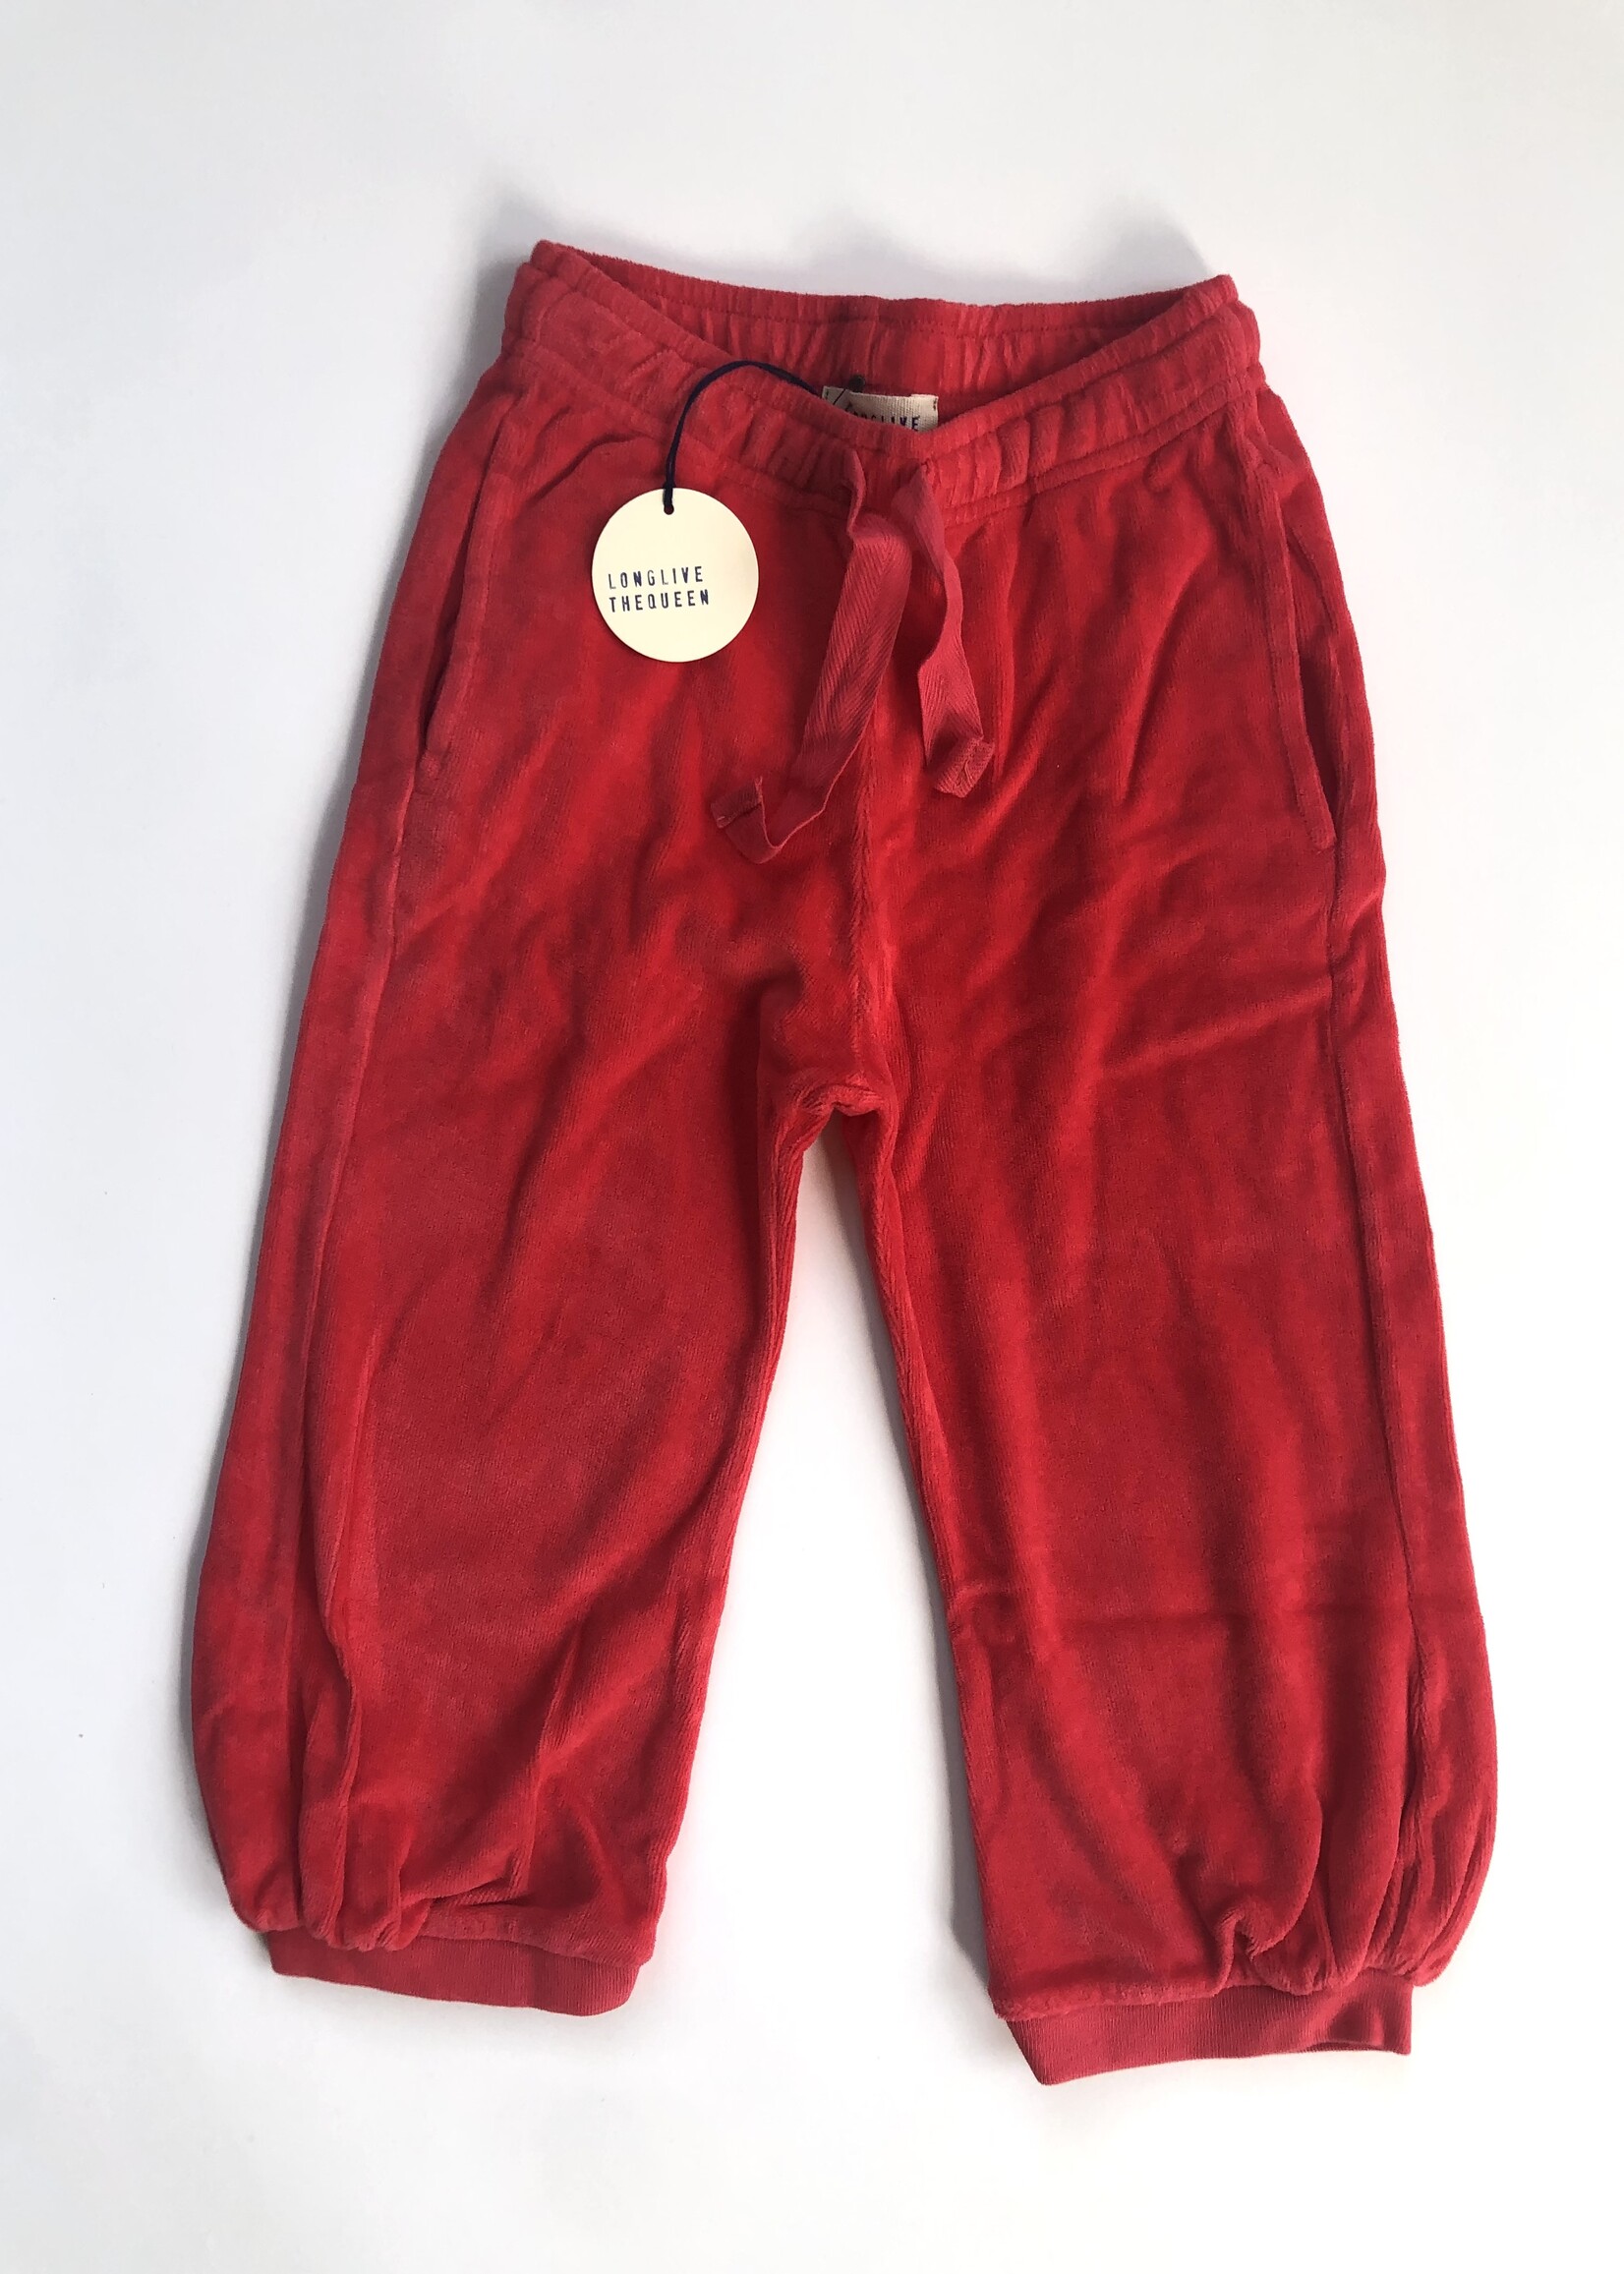 Long Live The Queen Bright raspberry sweat pants 4y